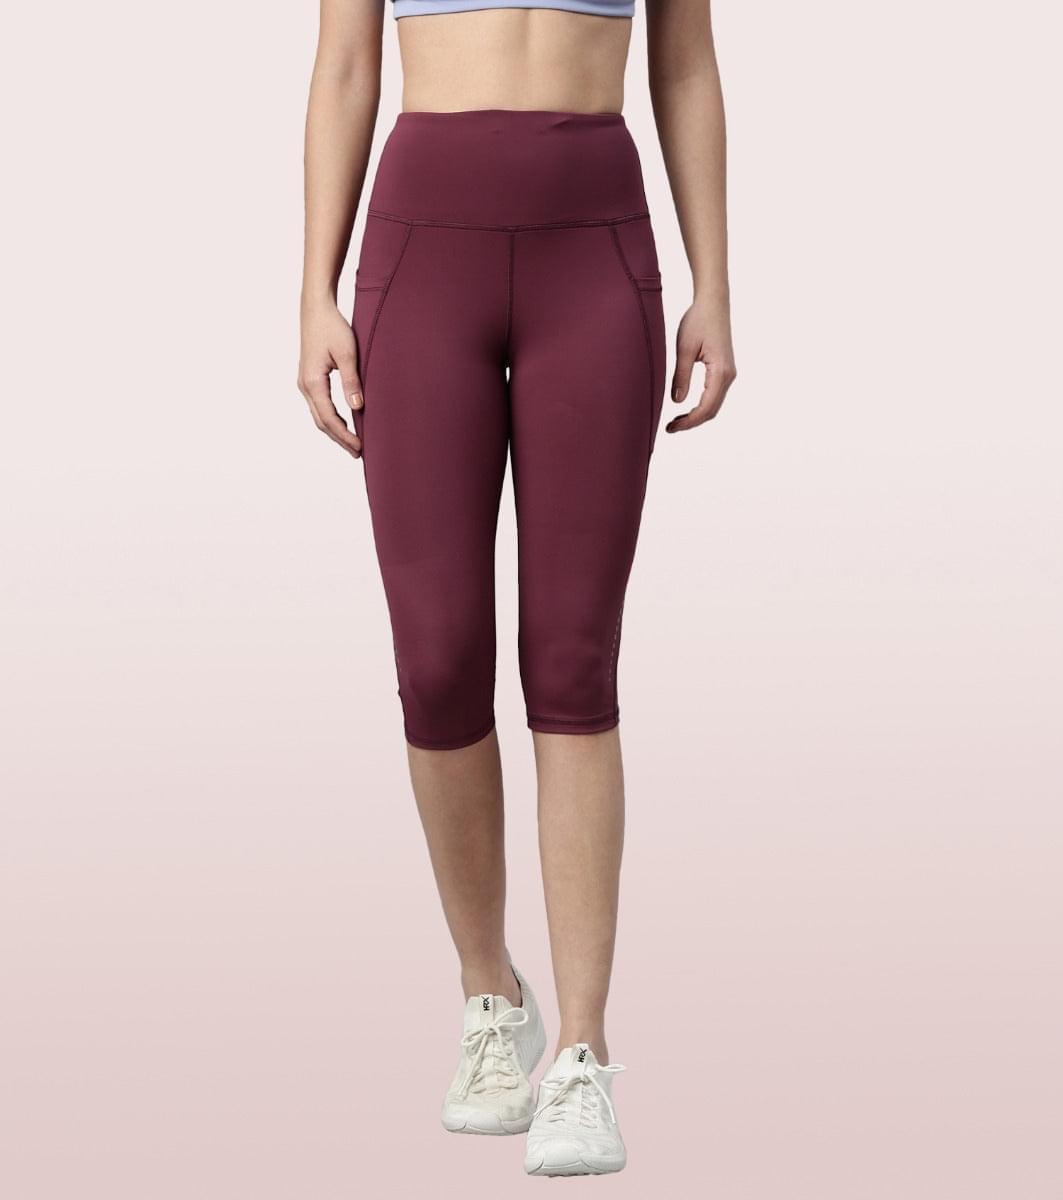 Buy Enamor Women Featherweight Thermal Legging With Sweat Wicking &  Antimicrobial Finish - Thermal Bottoms for Women 15591654